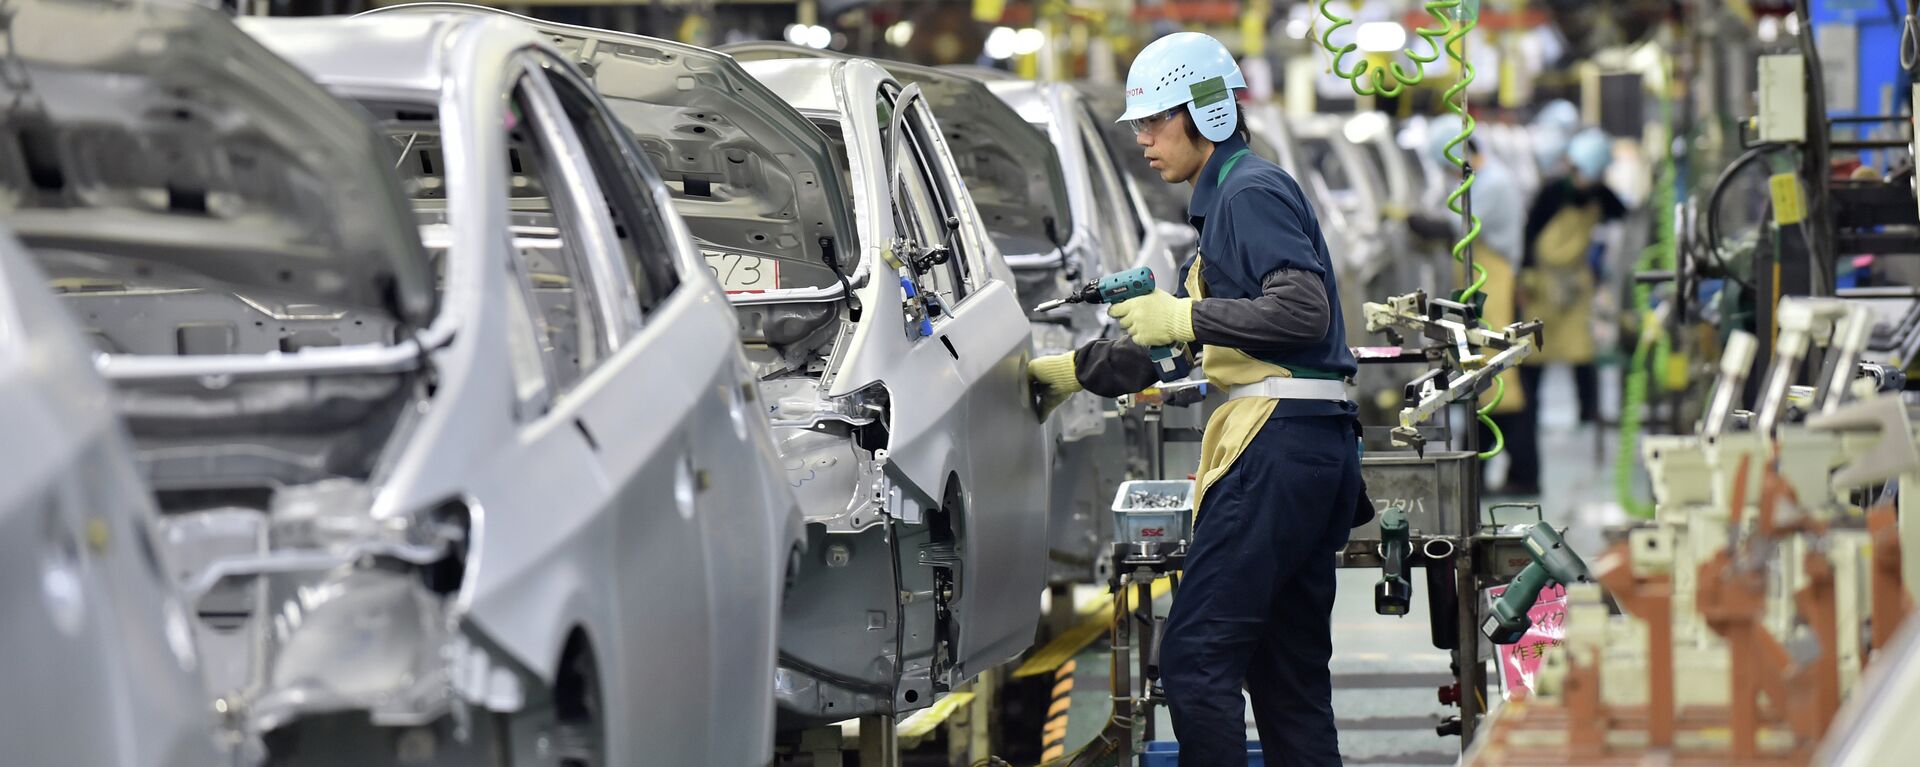 People work on the production line of the Toyota Motor Prius at the company's Tsutsumi plant in Toyota, Aichi prefecture on December 4, 2014 - Sputnik Việt Nam, 1920, 17.11.2018